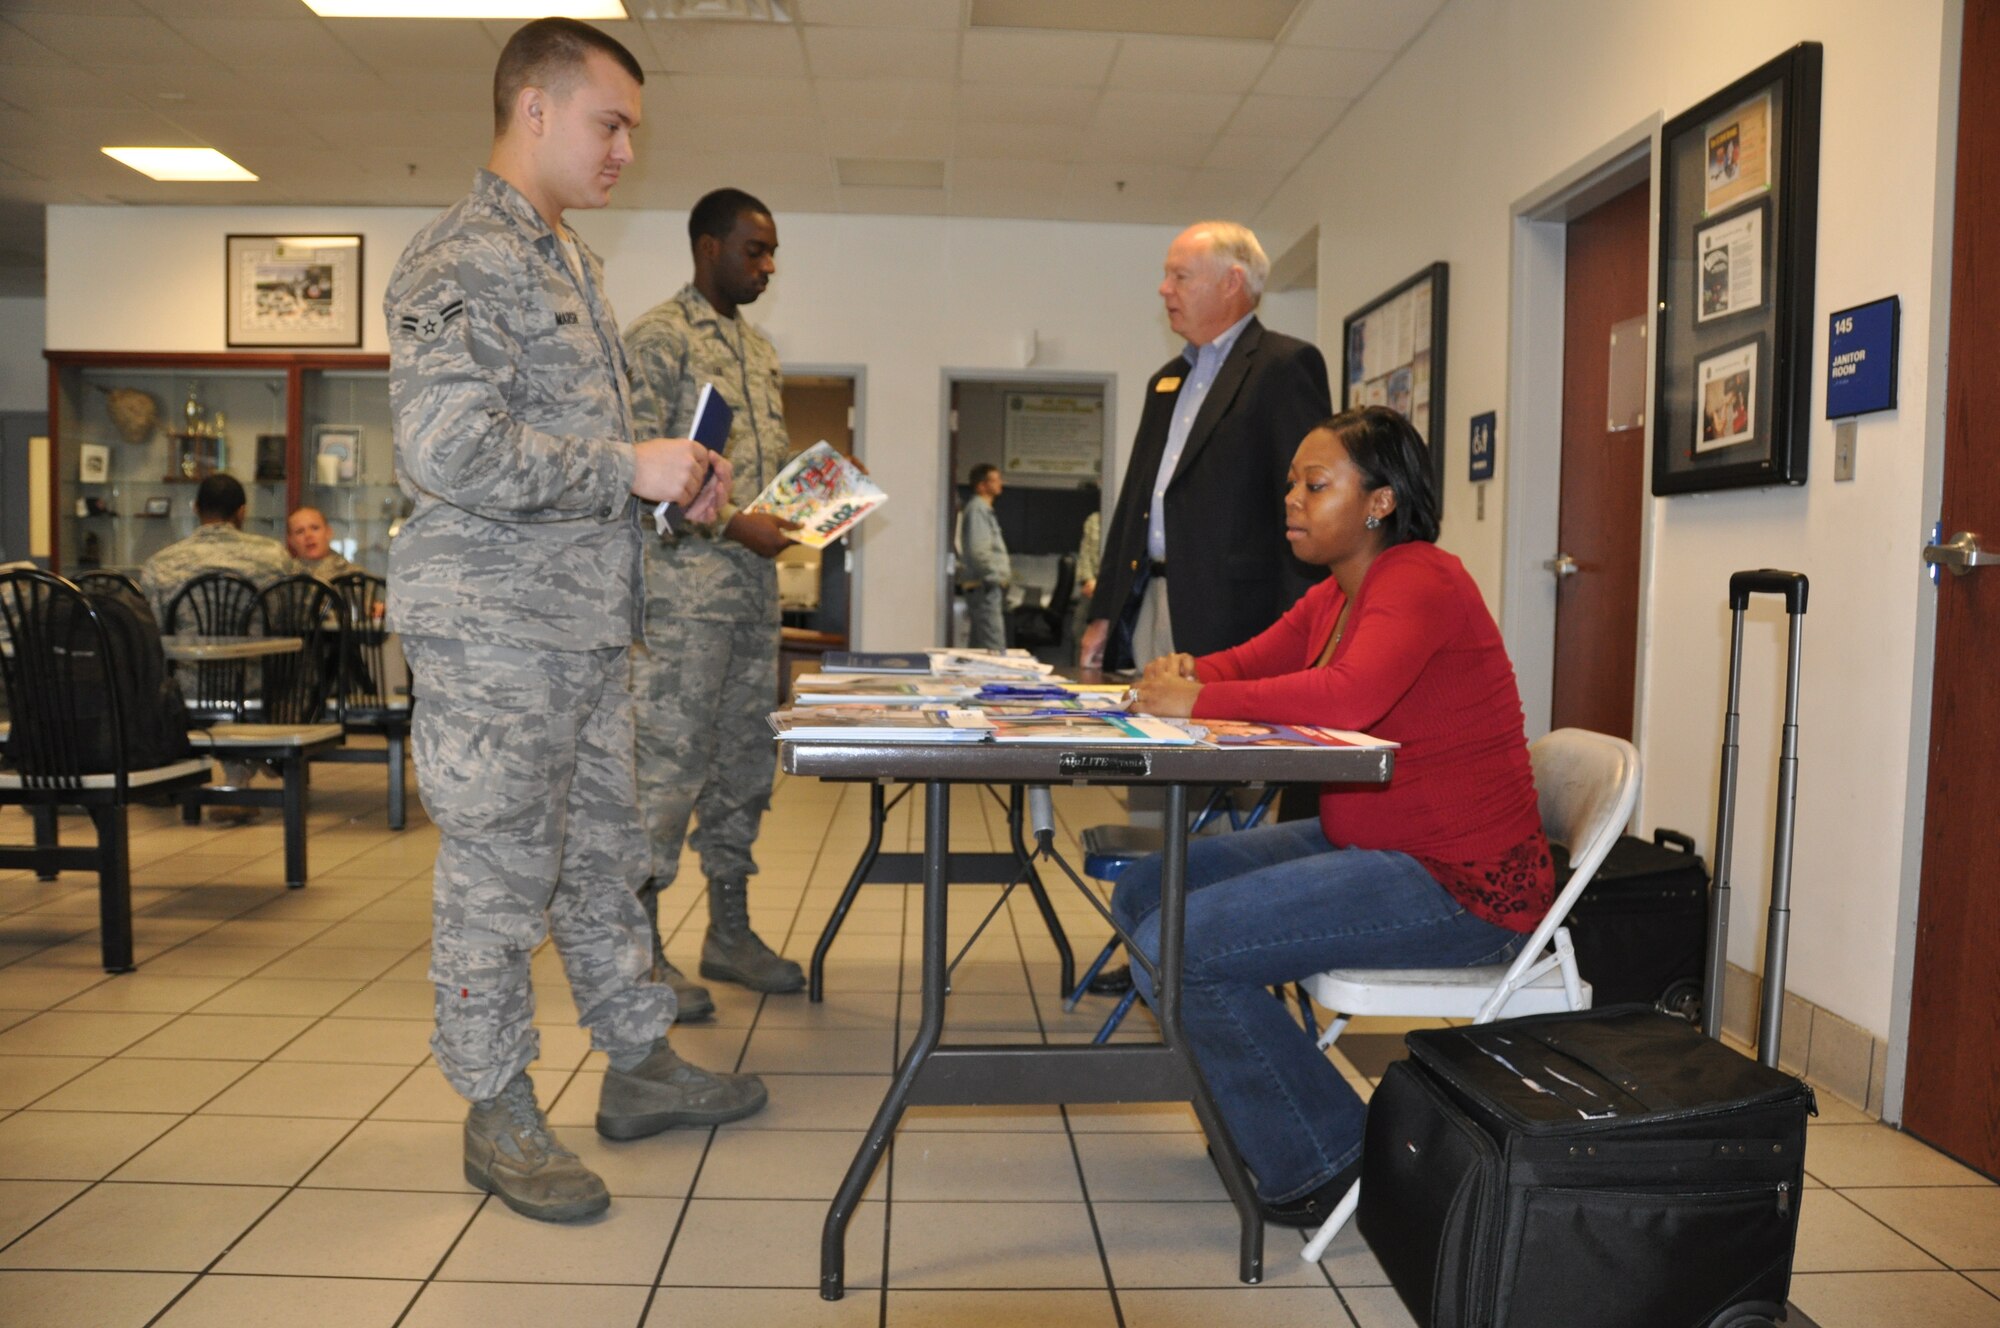 Jim Harkey, Military Family Life counselor, and Latoya Reese, Airman and Family Readiness work life specialist, speak with Airmen at the 43rd Air Maintenance Unit about financial issues during the Military Saves Campaign.  (U.S. Air Force photo/Senior Airman Veronica McMahon)